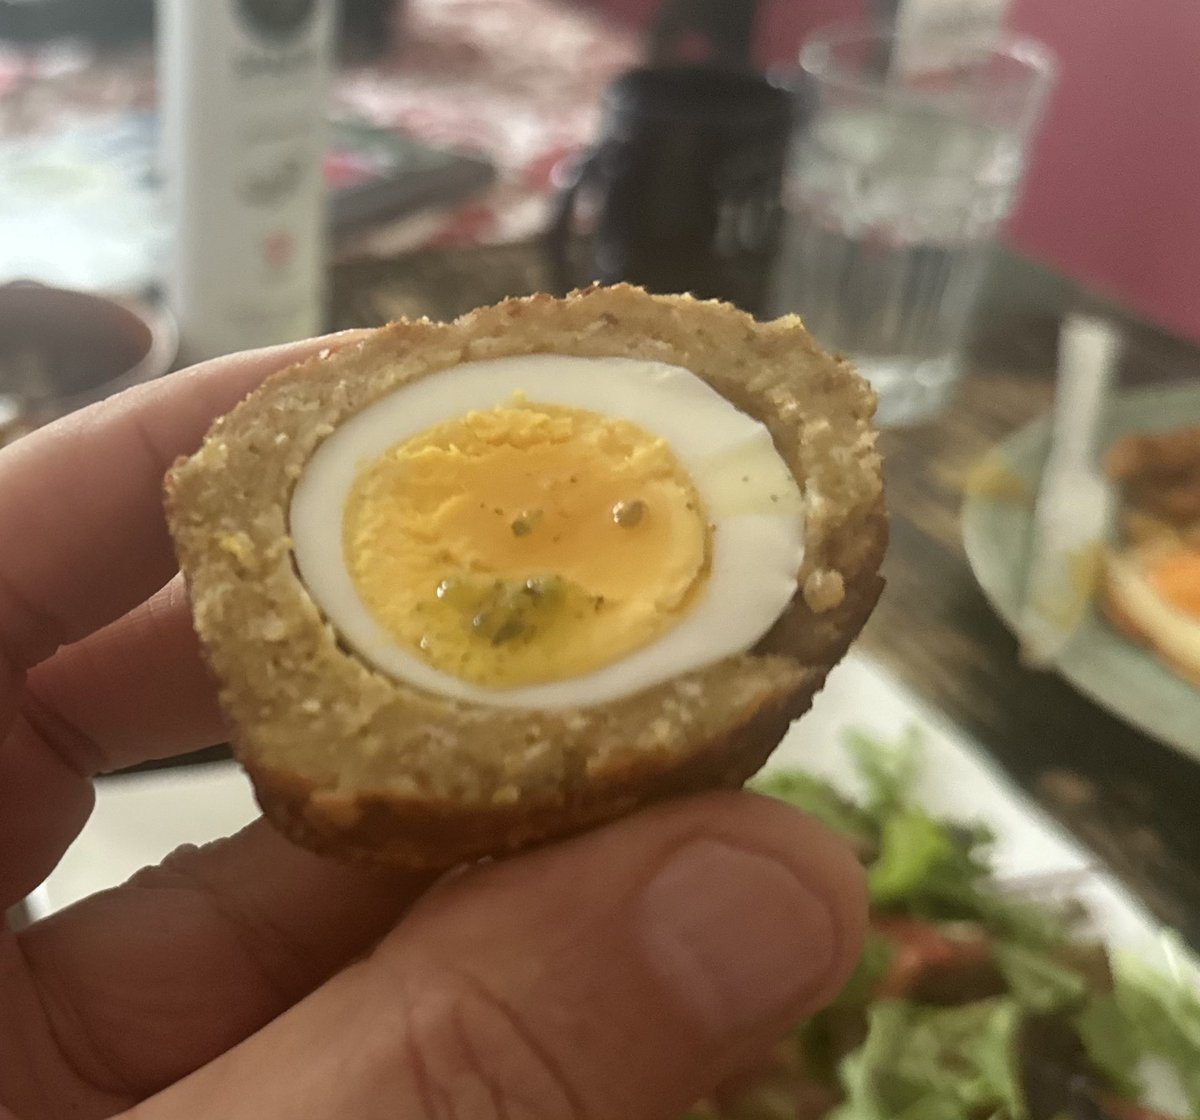 Scoop! The first perfect Meatless Scotch Egg in New Haven was just created at the Kaminskis household! 
#PCCMEats 
#DoctorsWhoWasteTheirTime